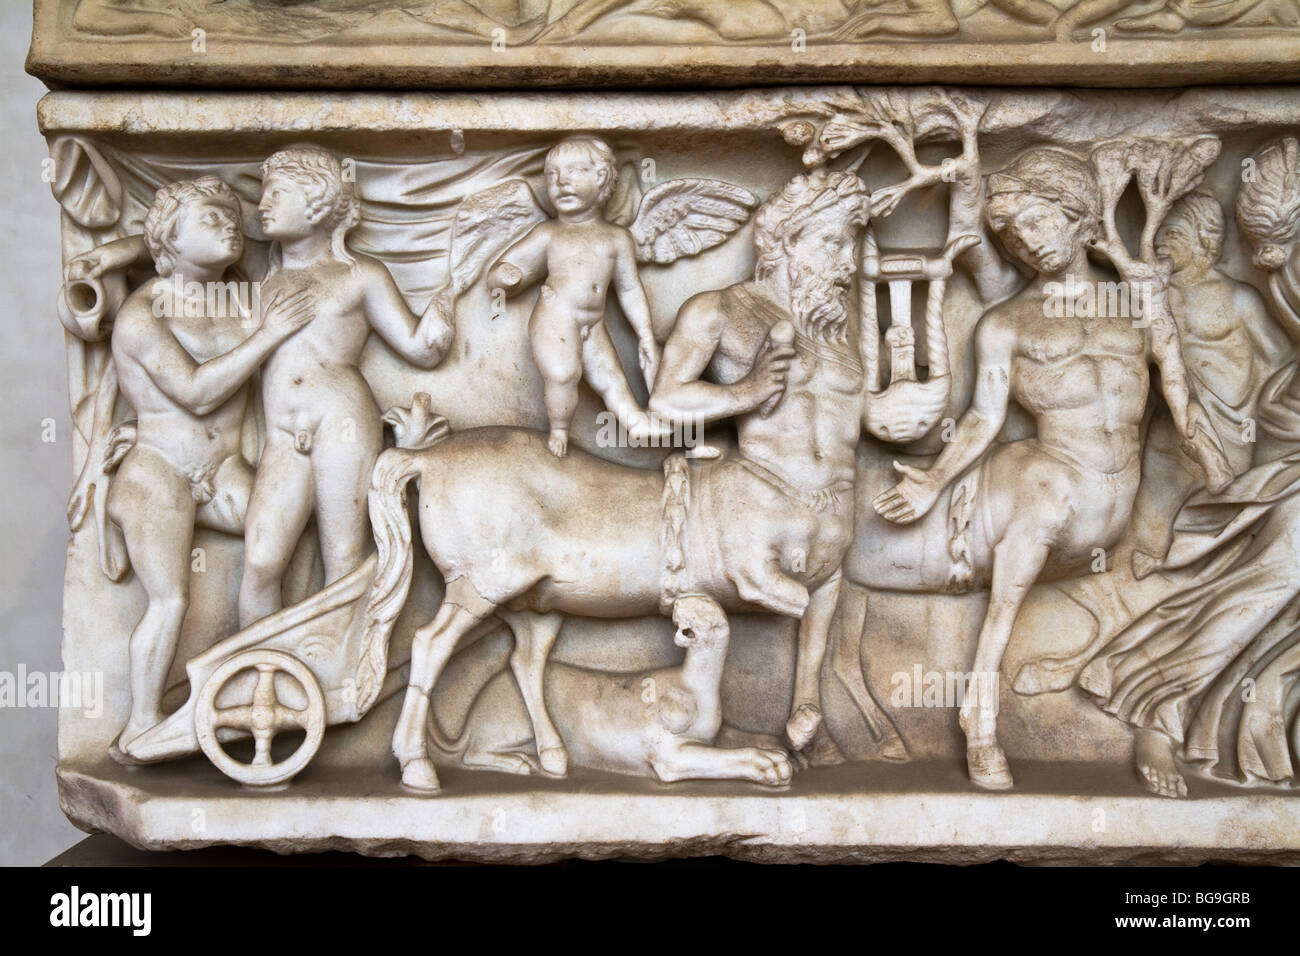 Detail of a Dionysiac sarcophagus from Rome depicting a thiasos, ca. 160-180. See description for more information. Stock Photo